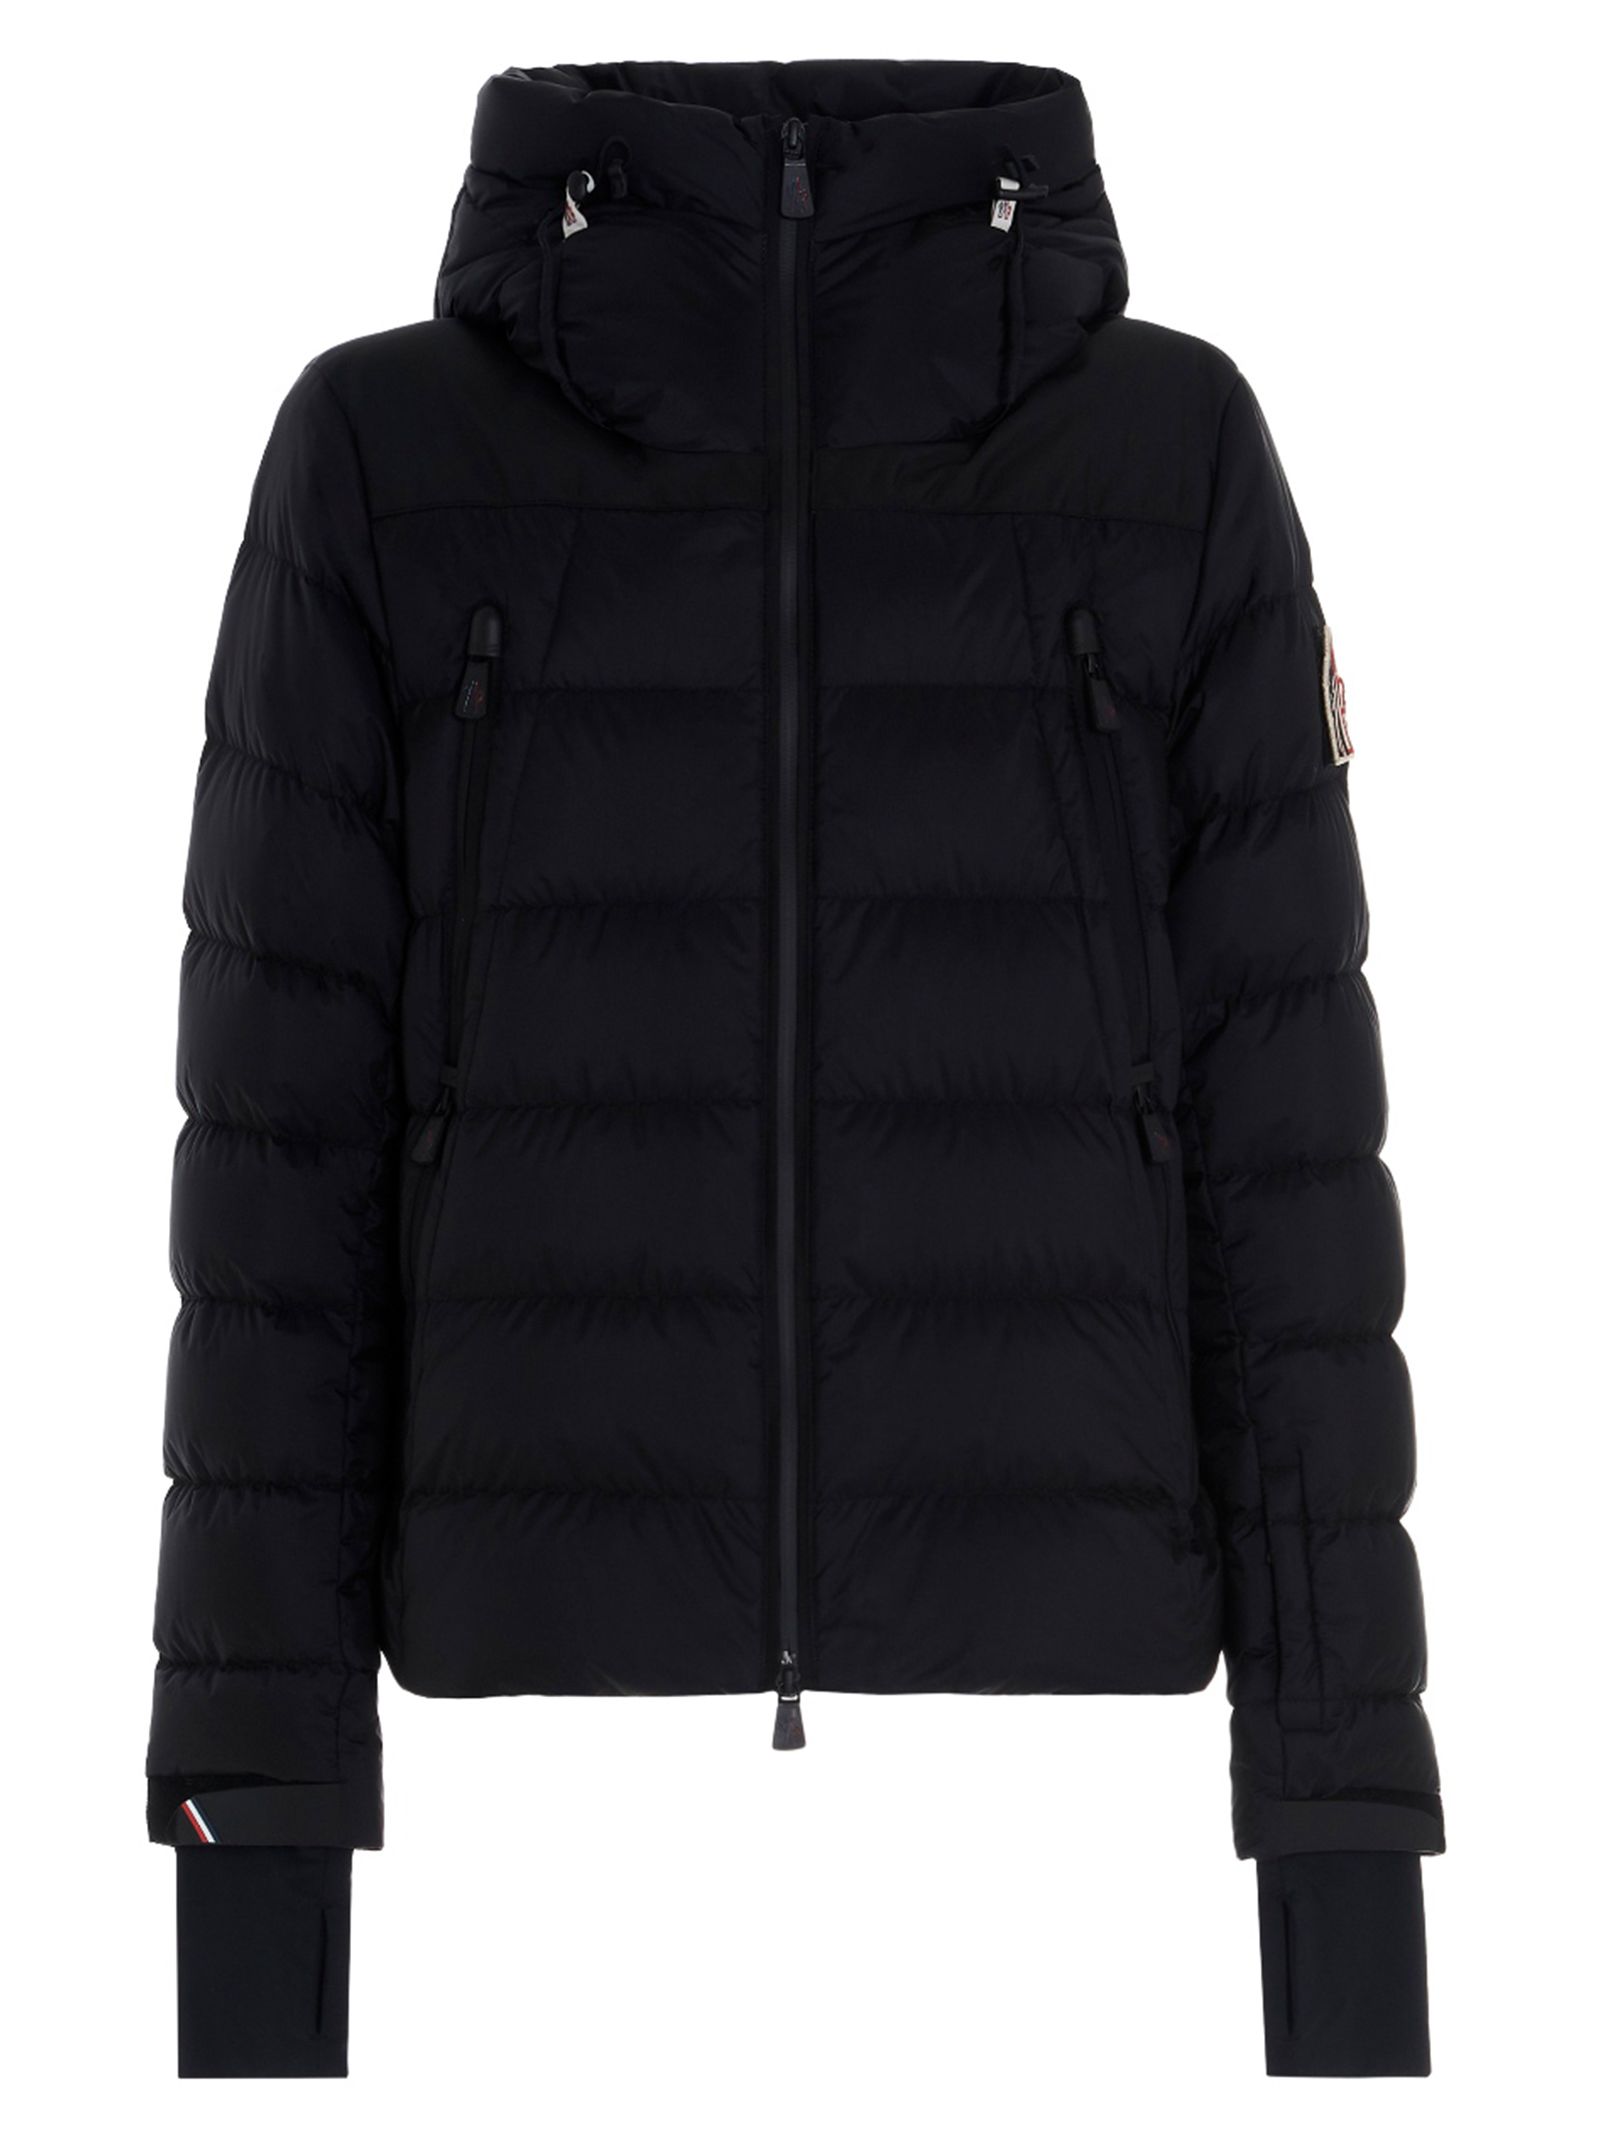 Moncler Grenoble Jackets | italist, ALWAYS LIKE A SALE